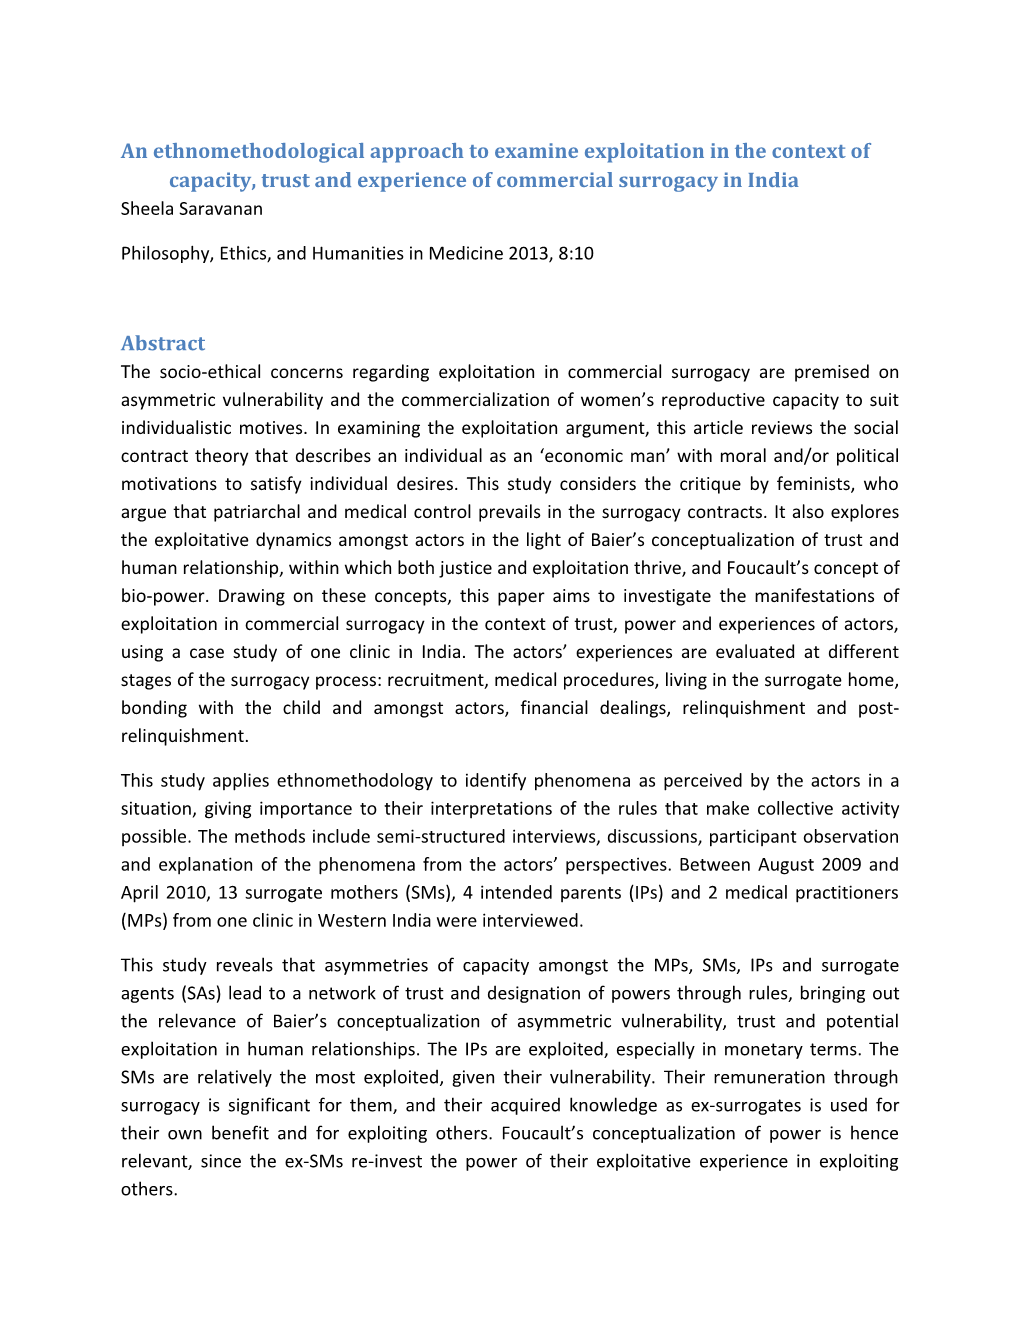 An Ethno Methodological Approach to Examine Exploitation in the Context of Capacity, Trust